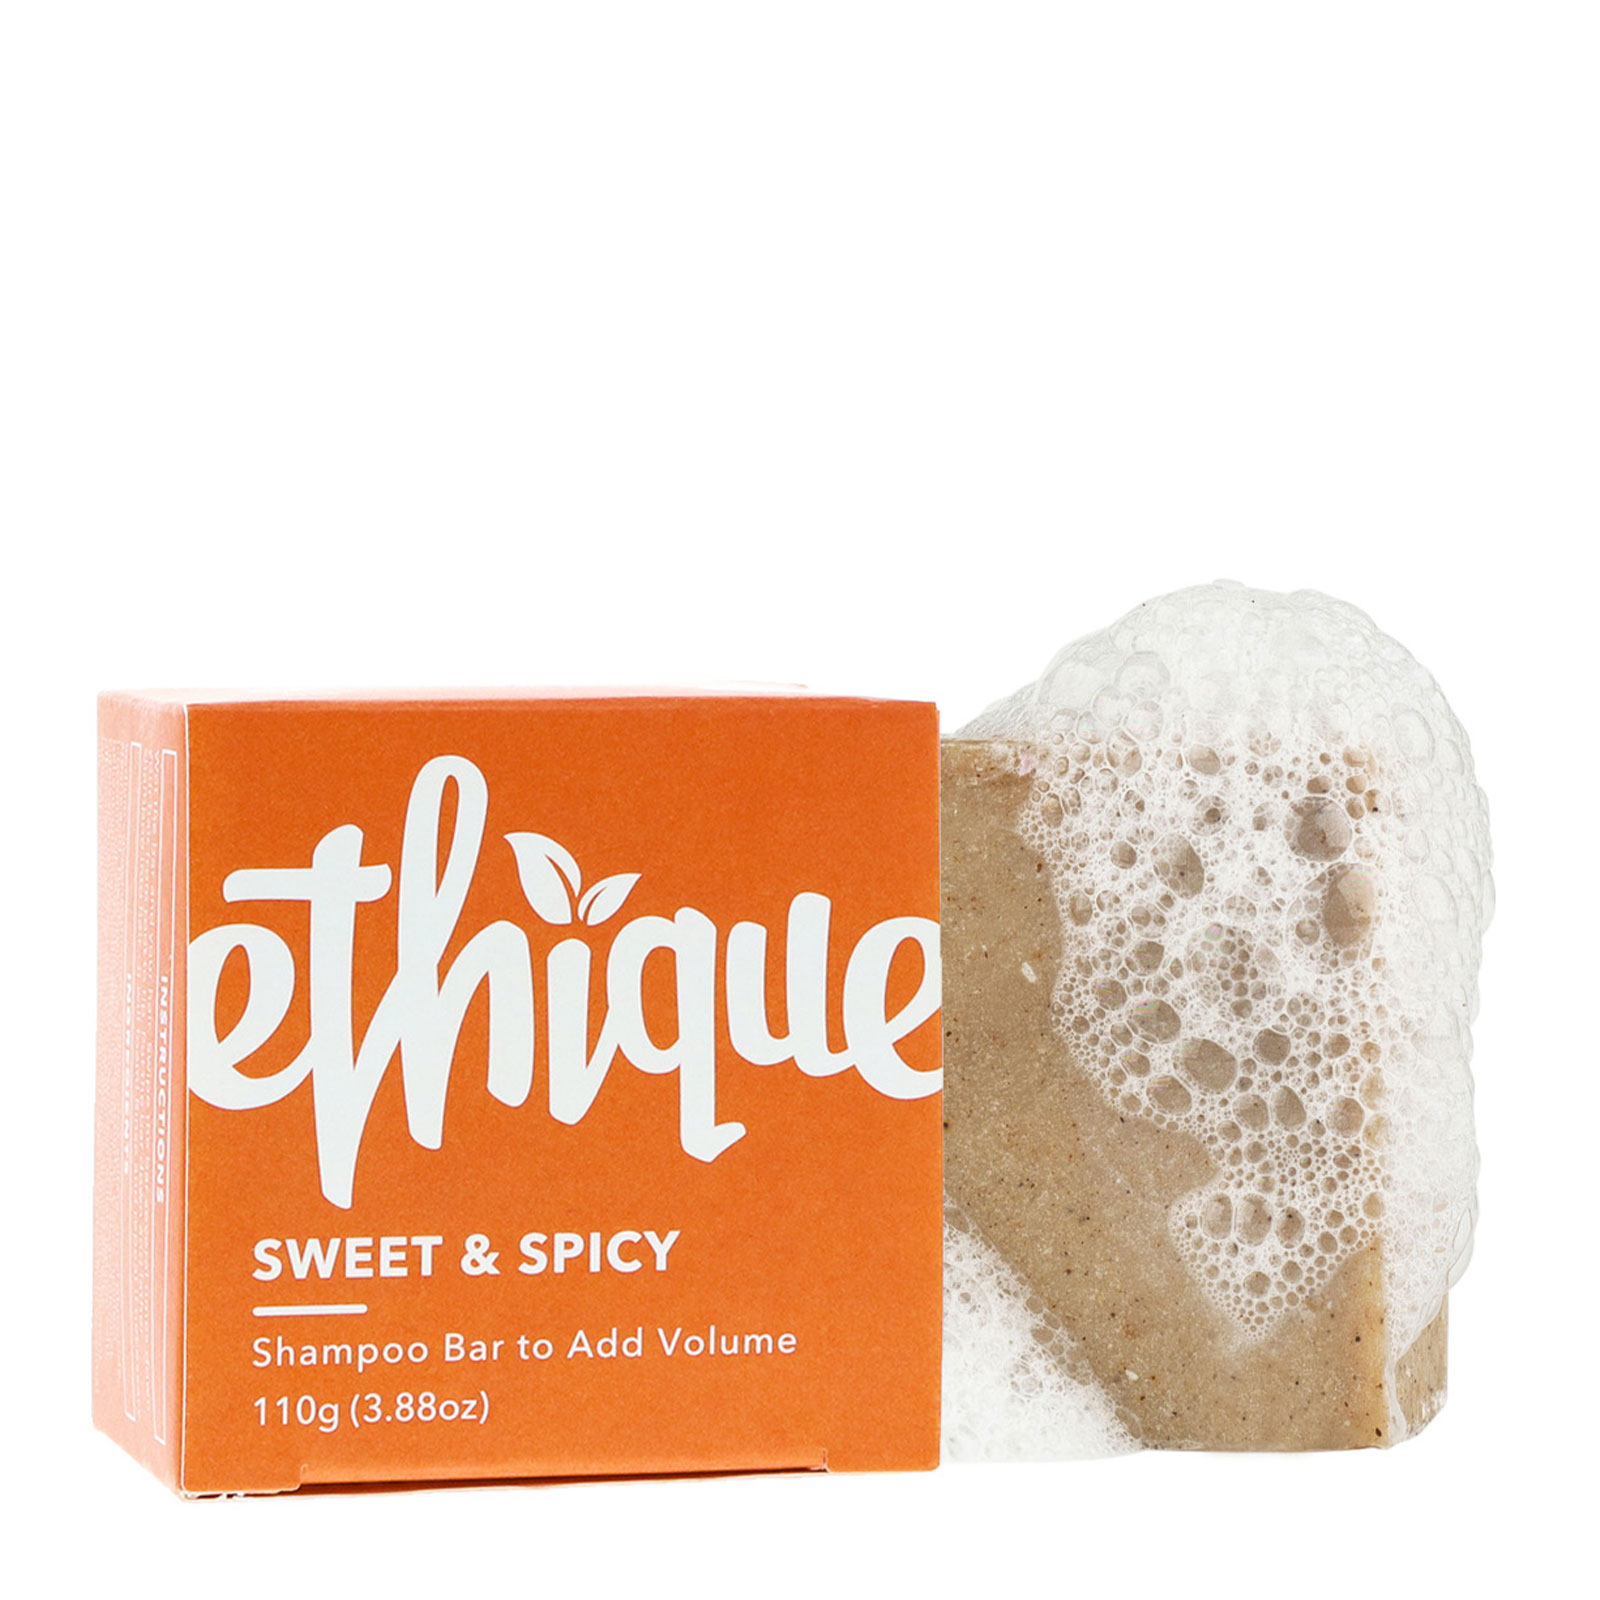 Ethique Sweet & Spicy Volumising Solid Shampoo 110G